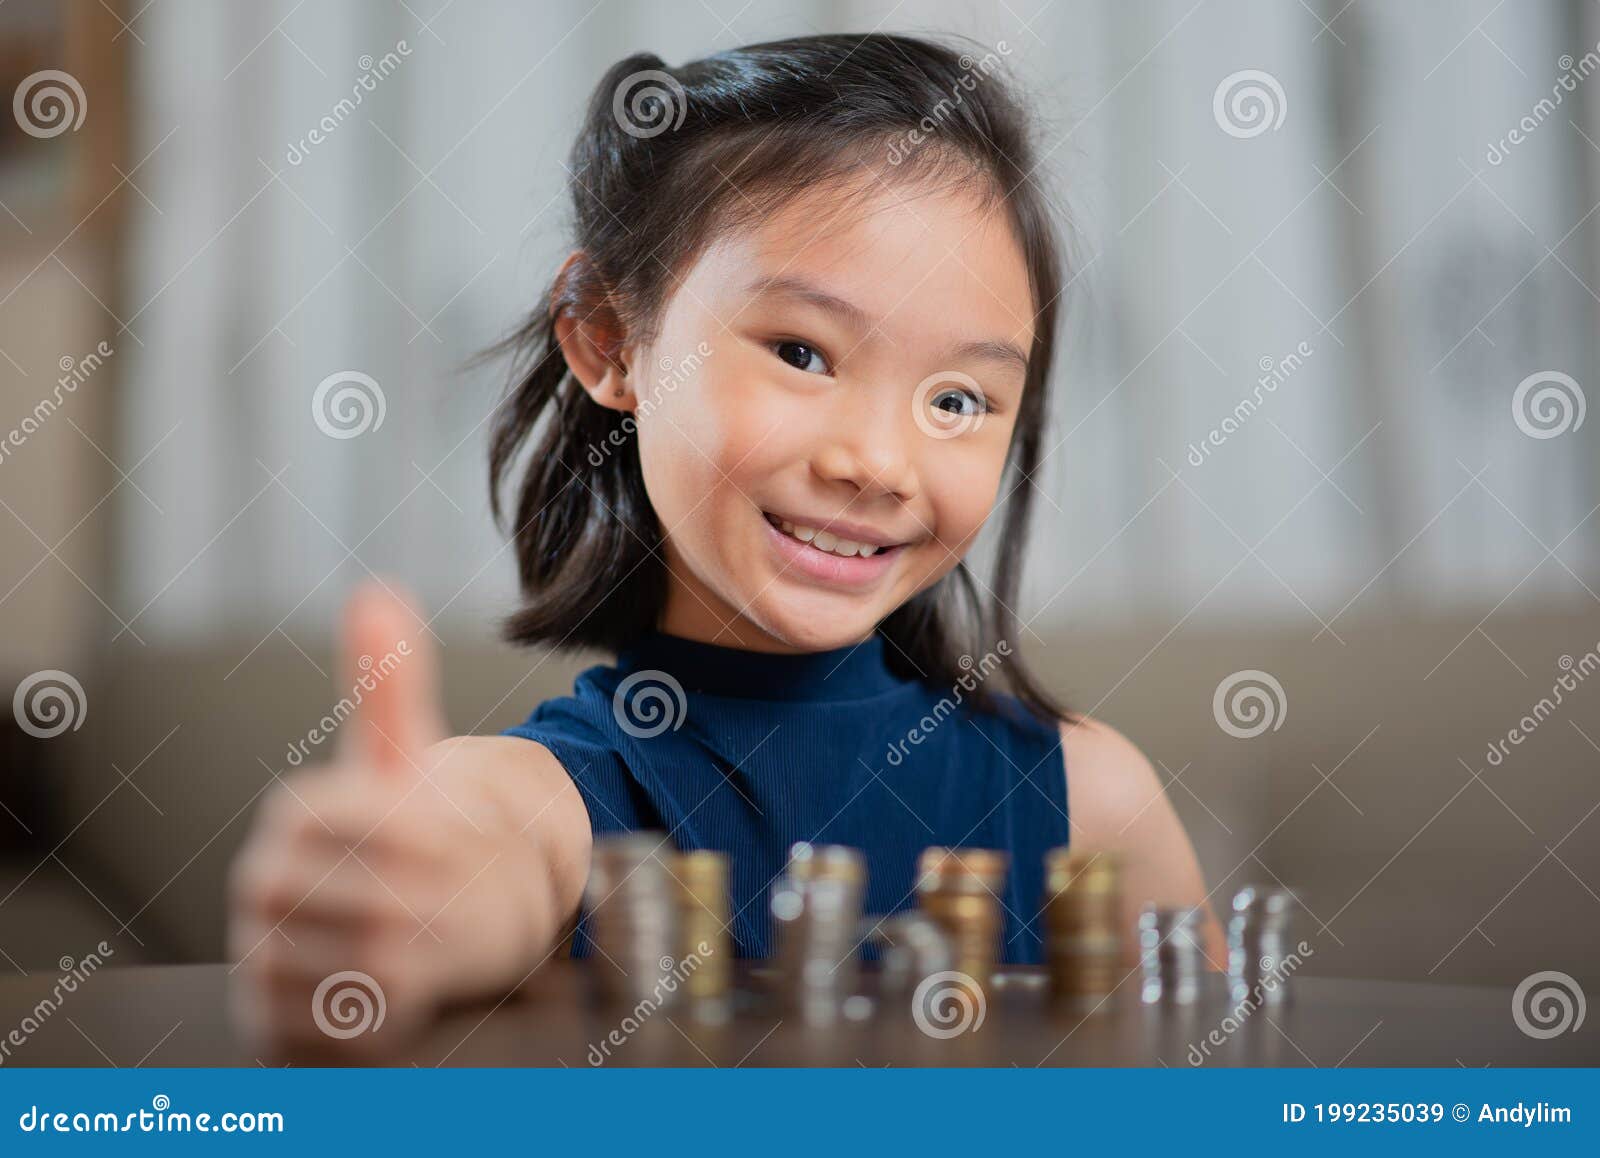 asian girl, managing finances, counting money